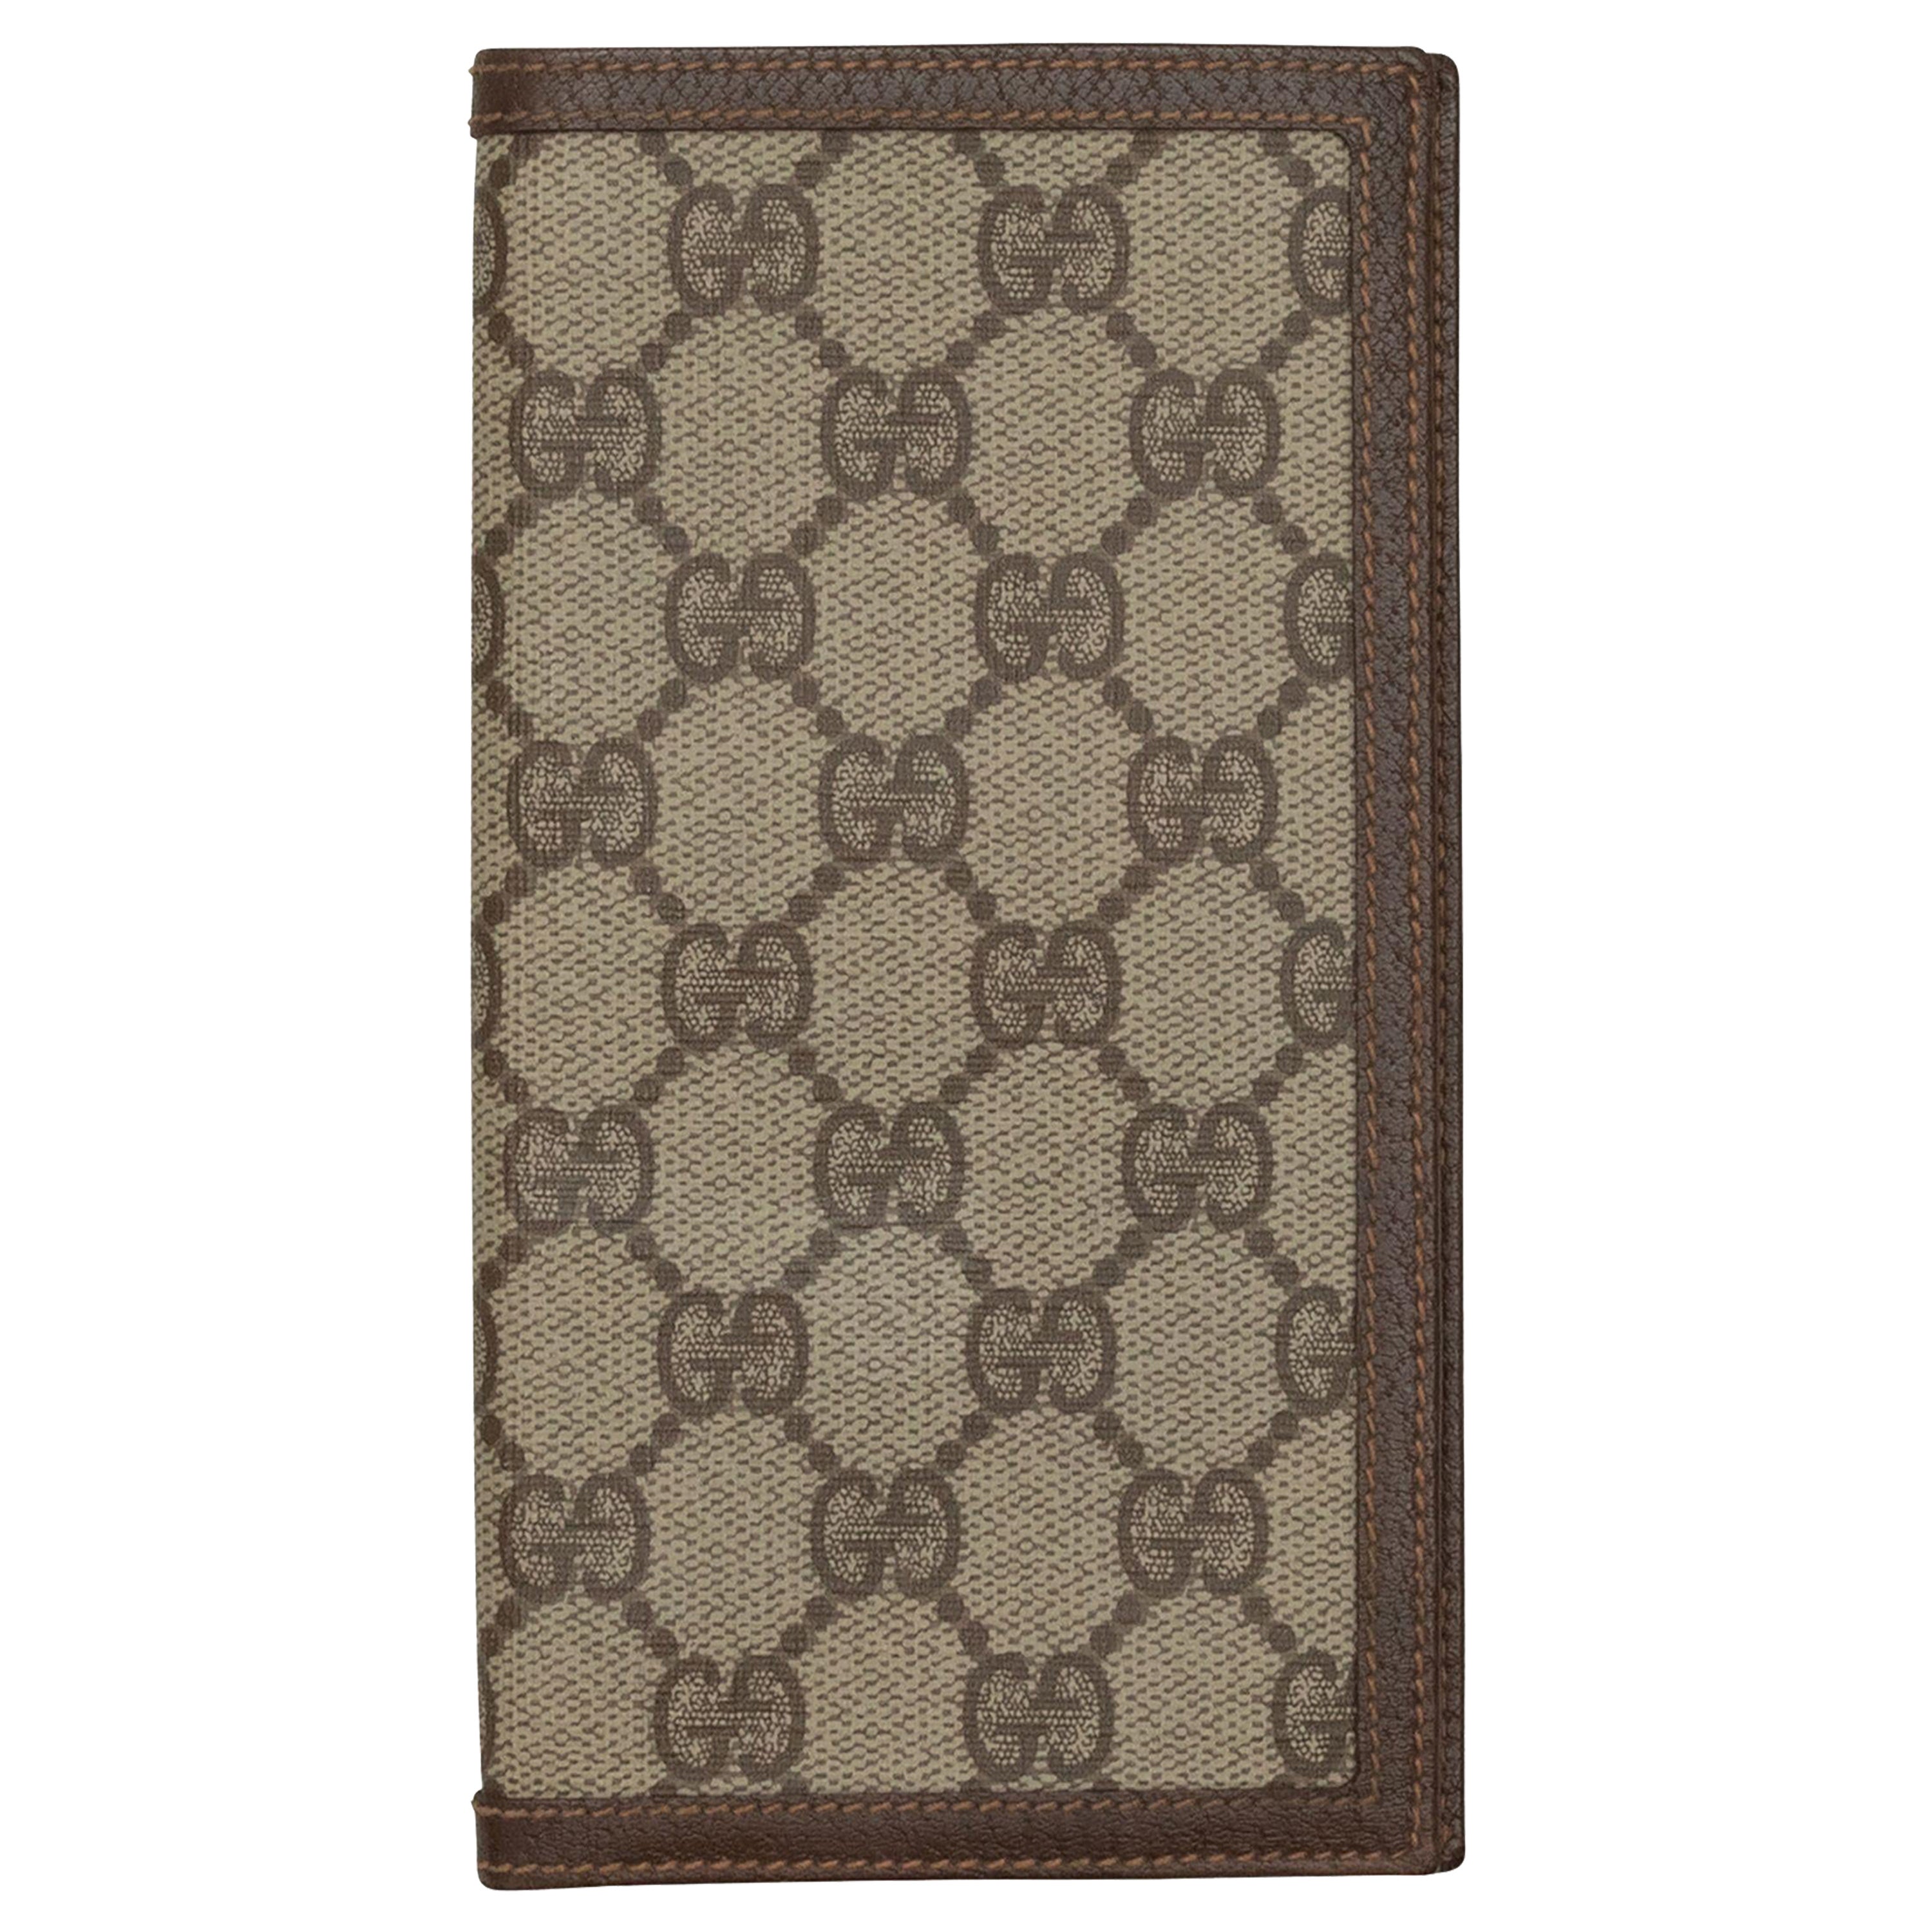 Gucci Checkbook Cover - Brown Other, Accessories - GUC54952